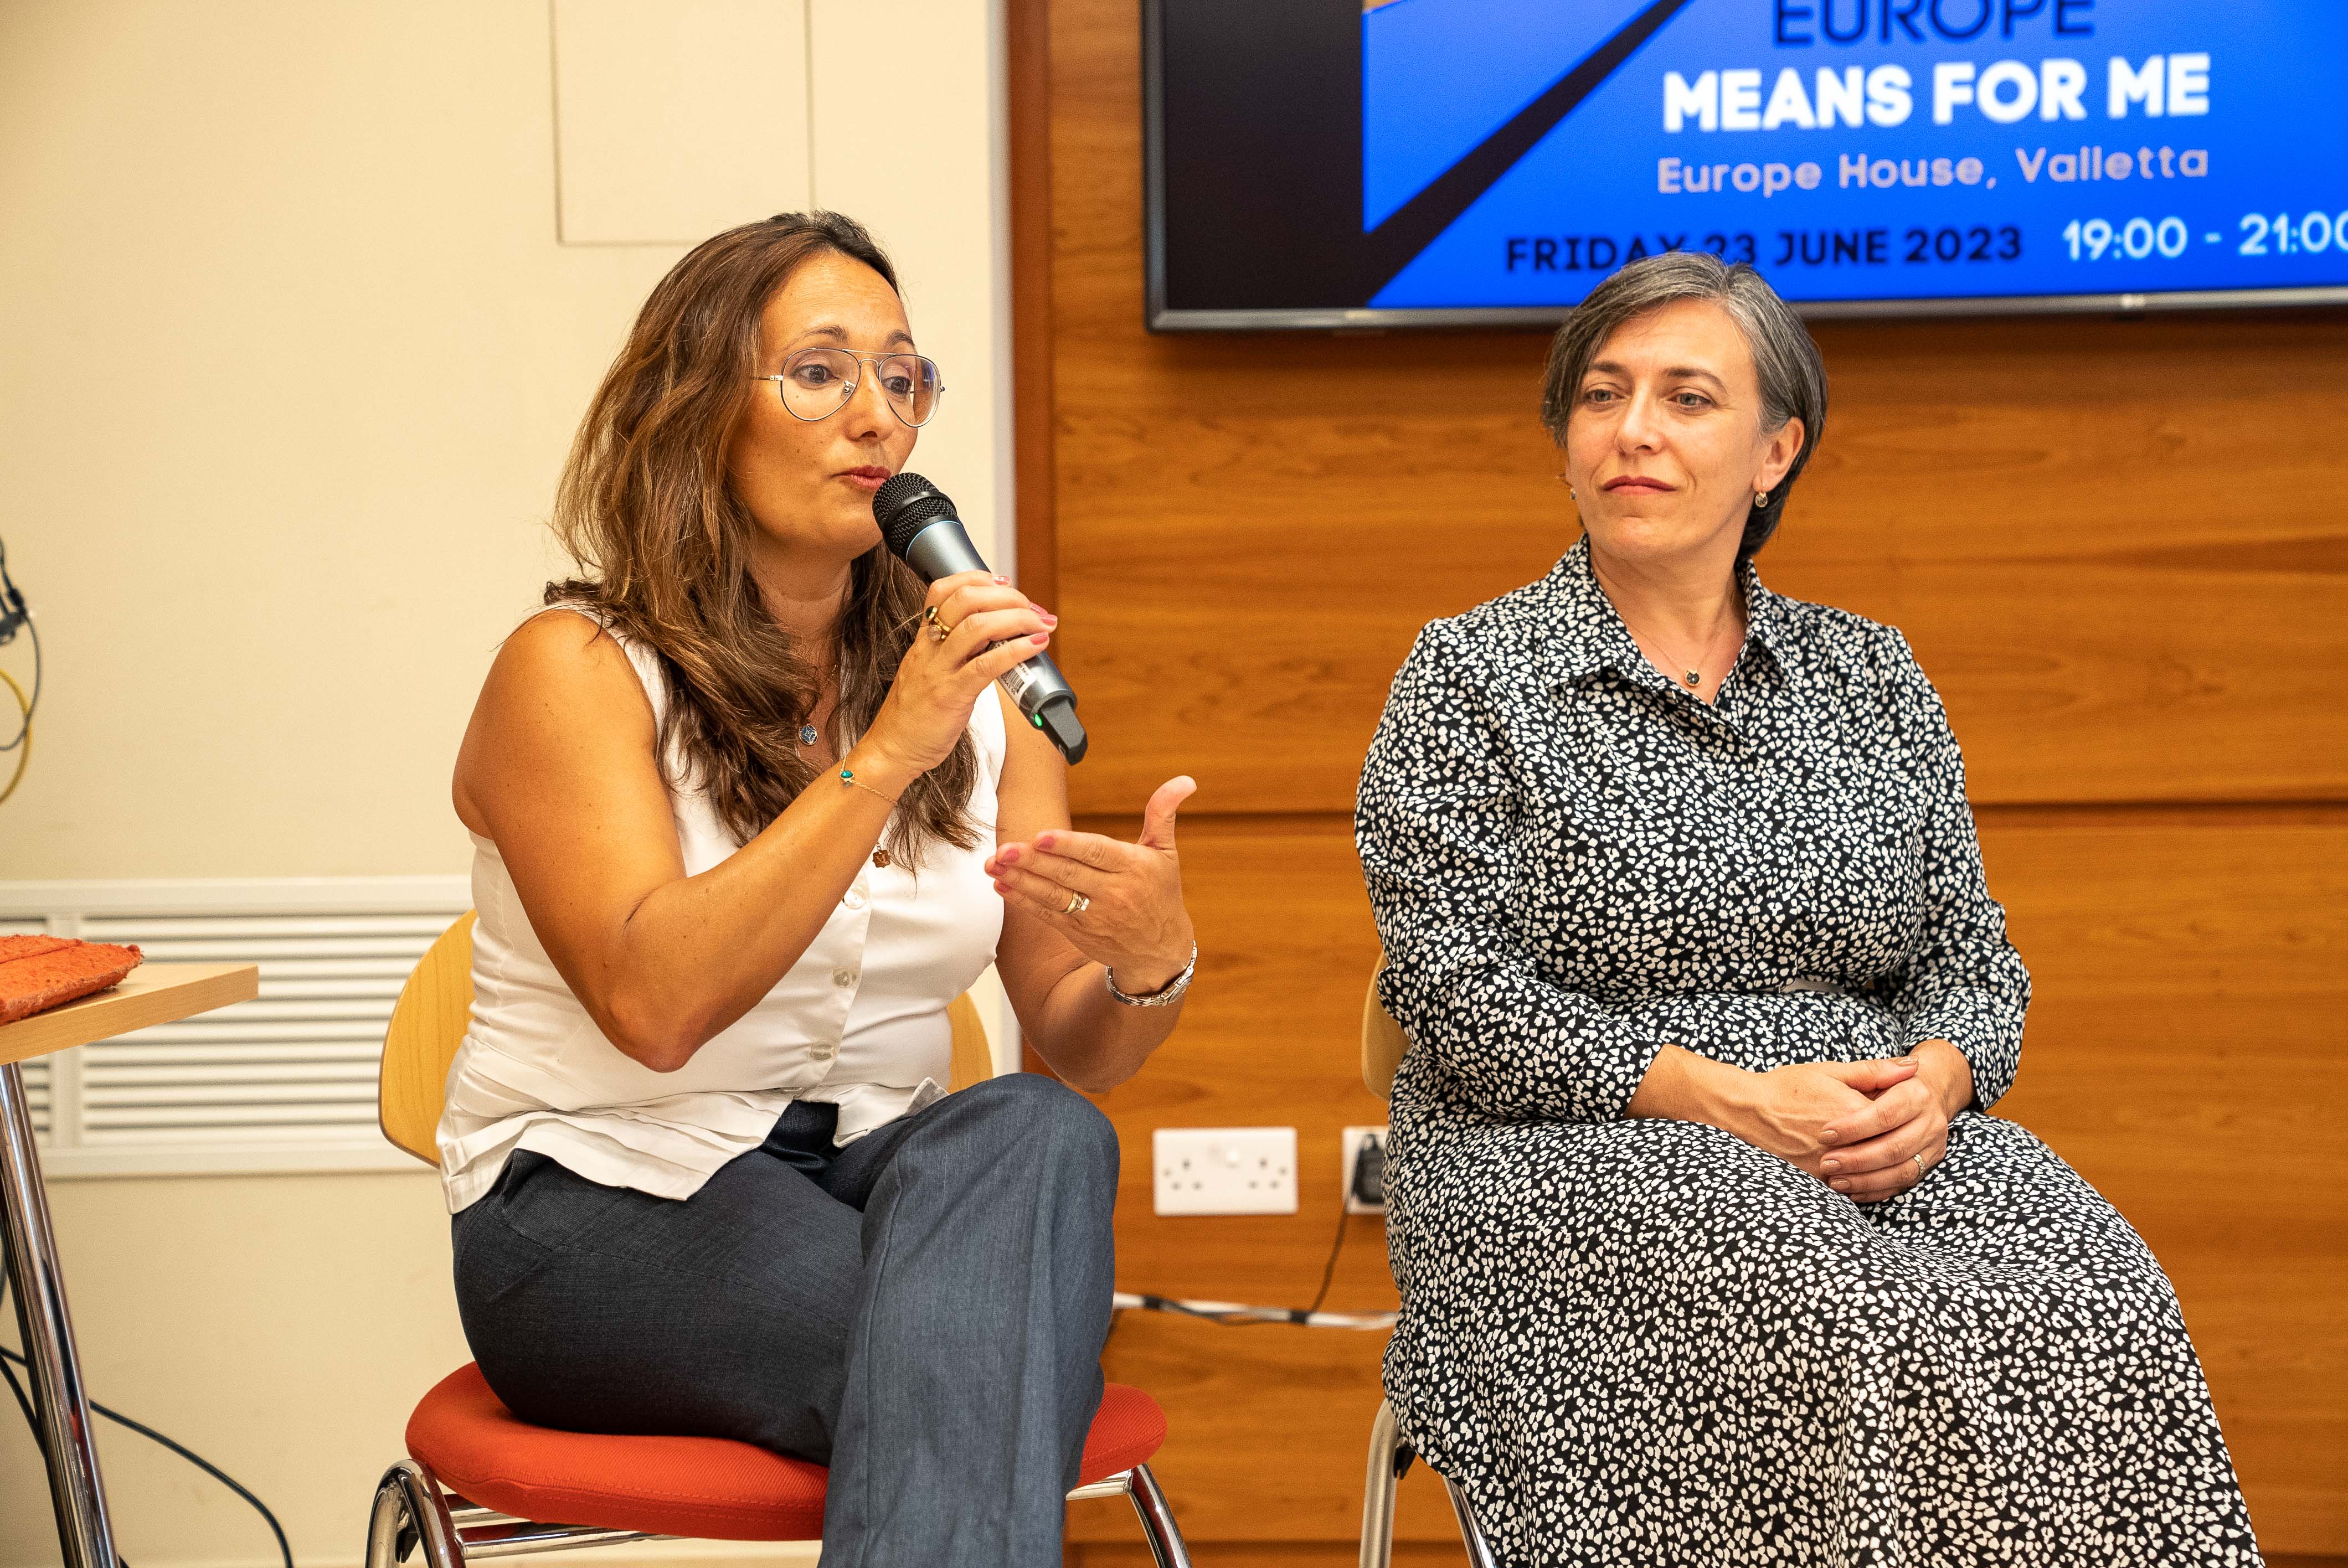 Norma Camilleri speaks during the second panel discussion at the "What Europe Means For Me" event